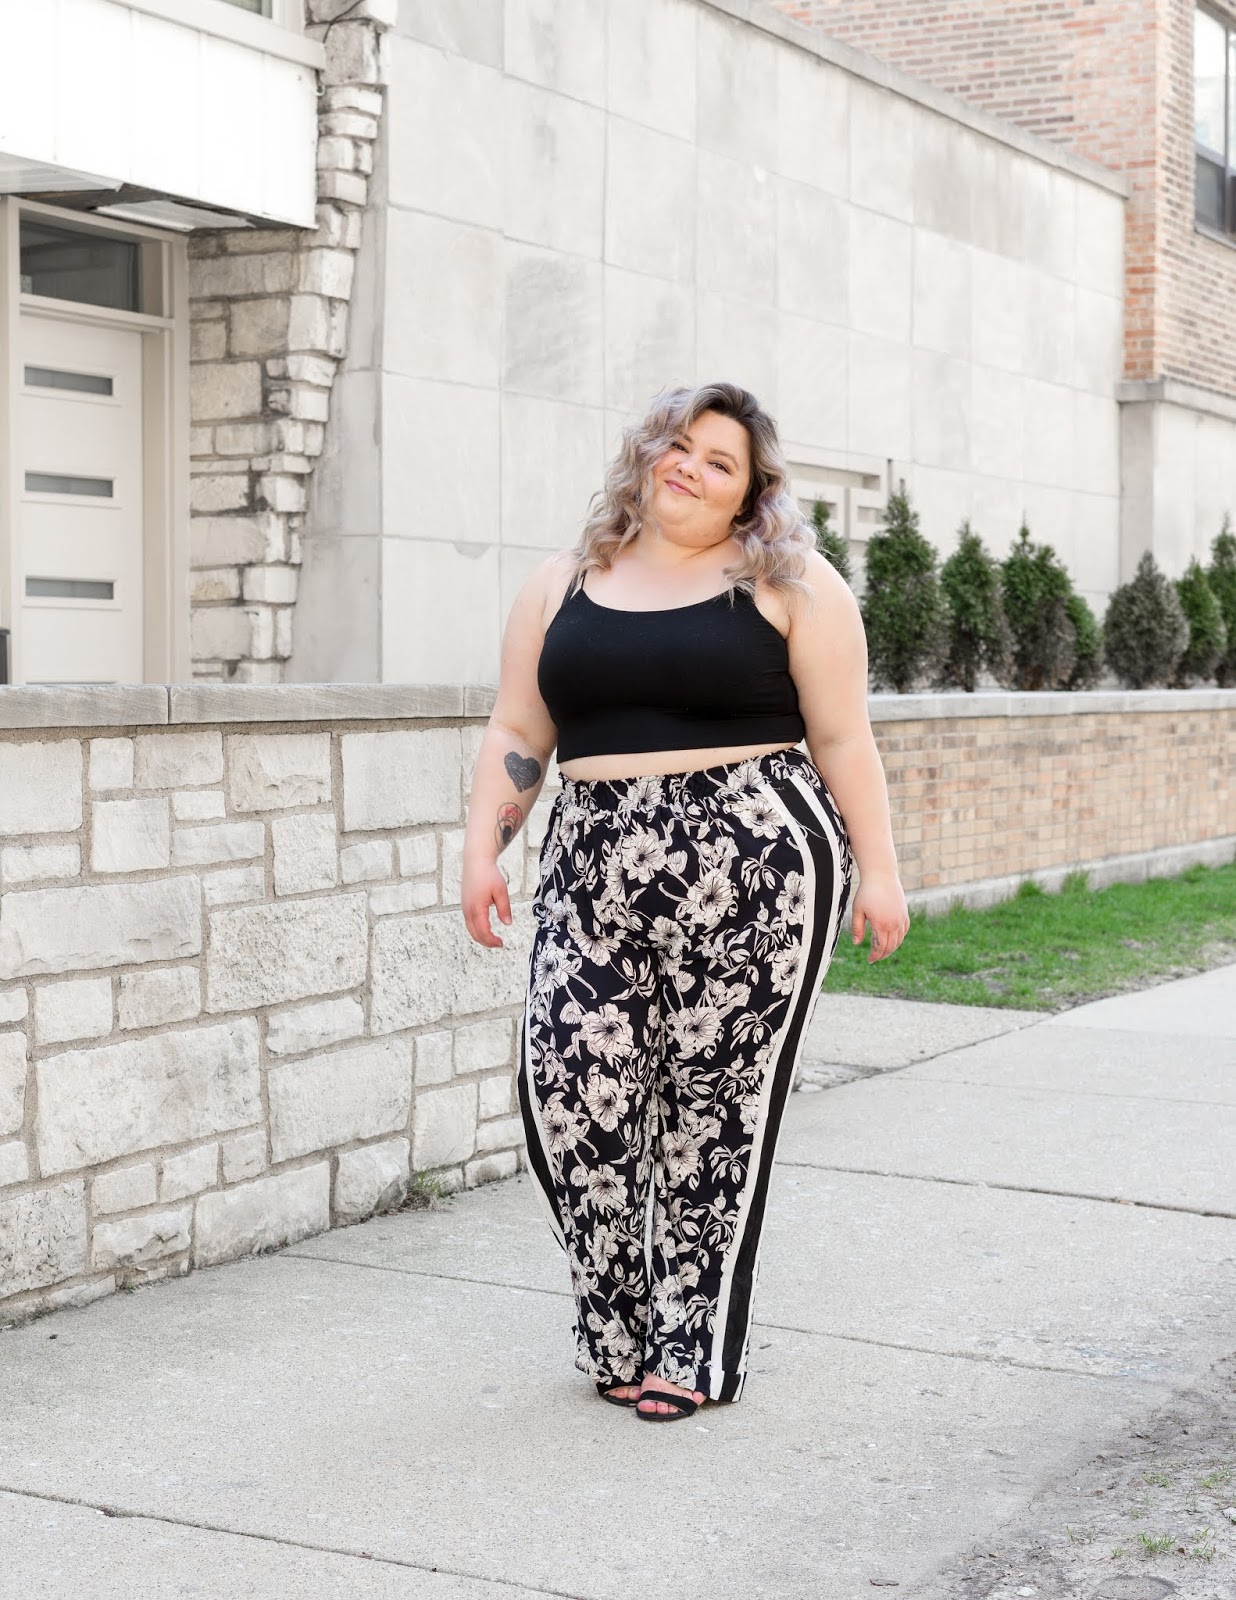 Chicago Plus Size Petite Fashion Blogger, YouTuber, and model Natalie Craig, of Natalie in the City, reviews Pink Clove UK's wide leg trousers and Fashion Nova Curves Crop Top.